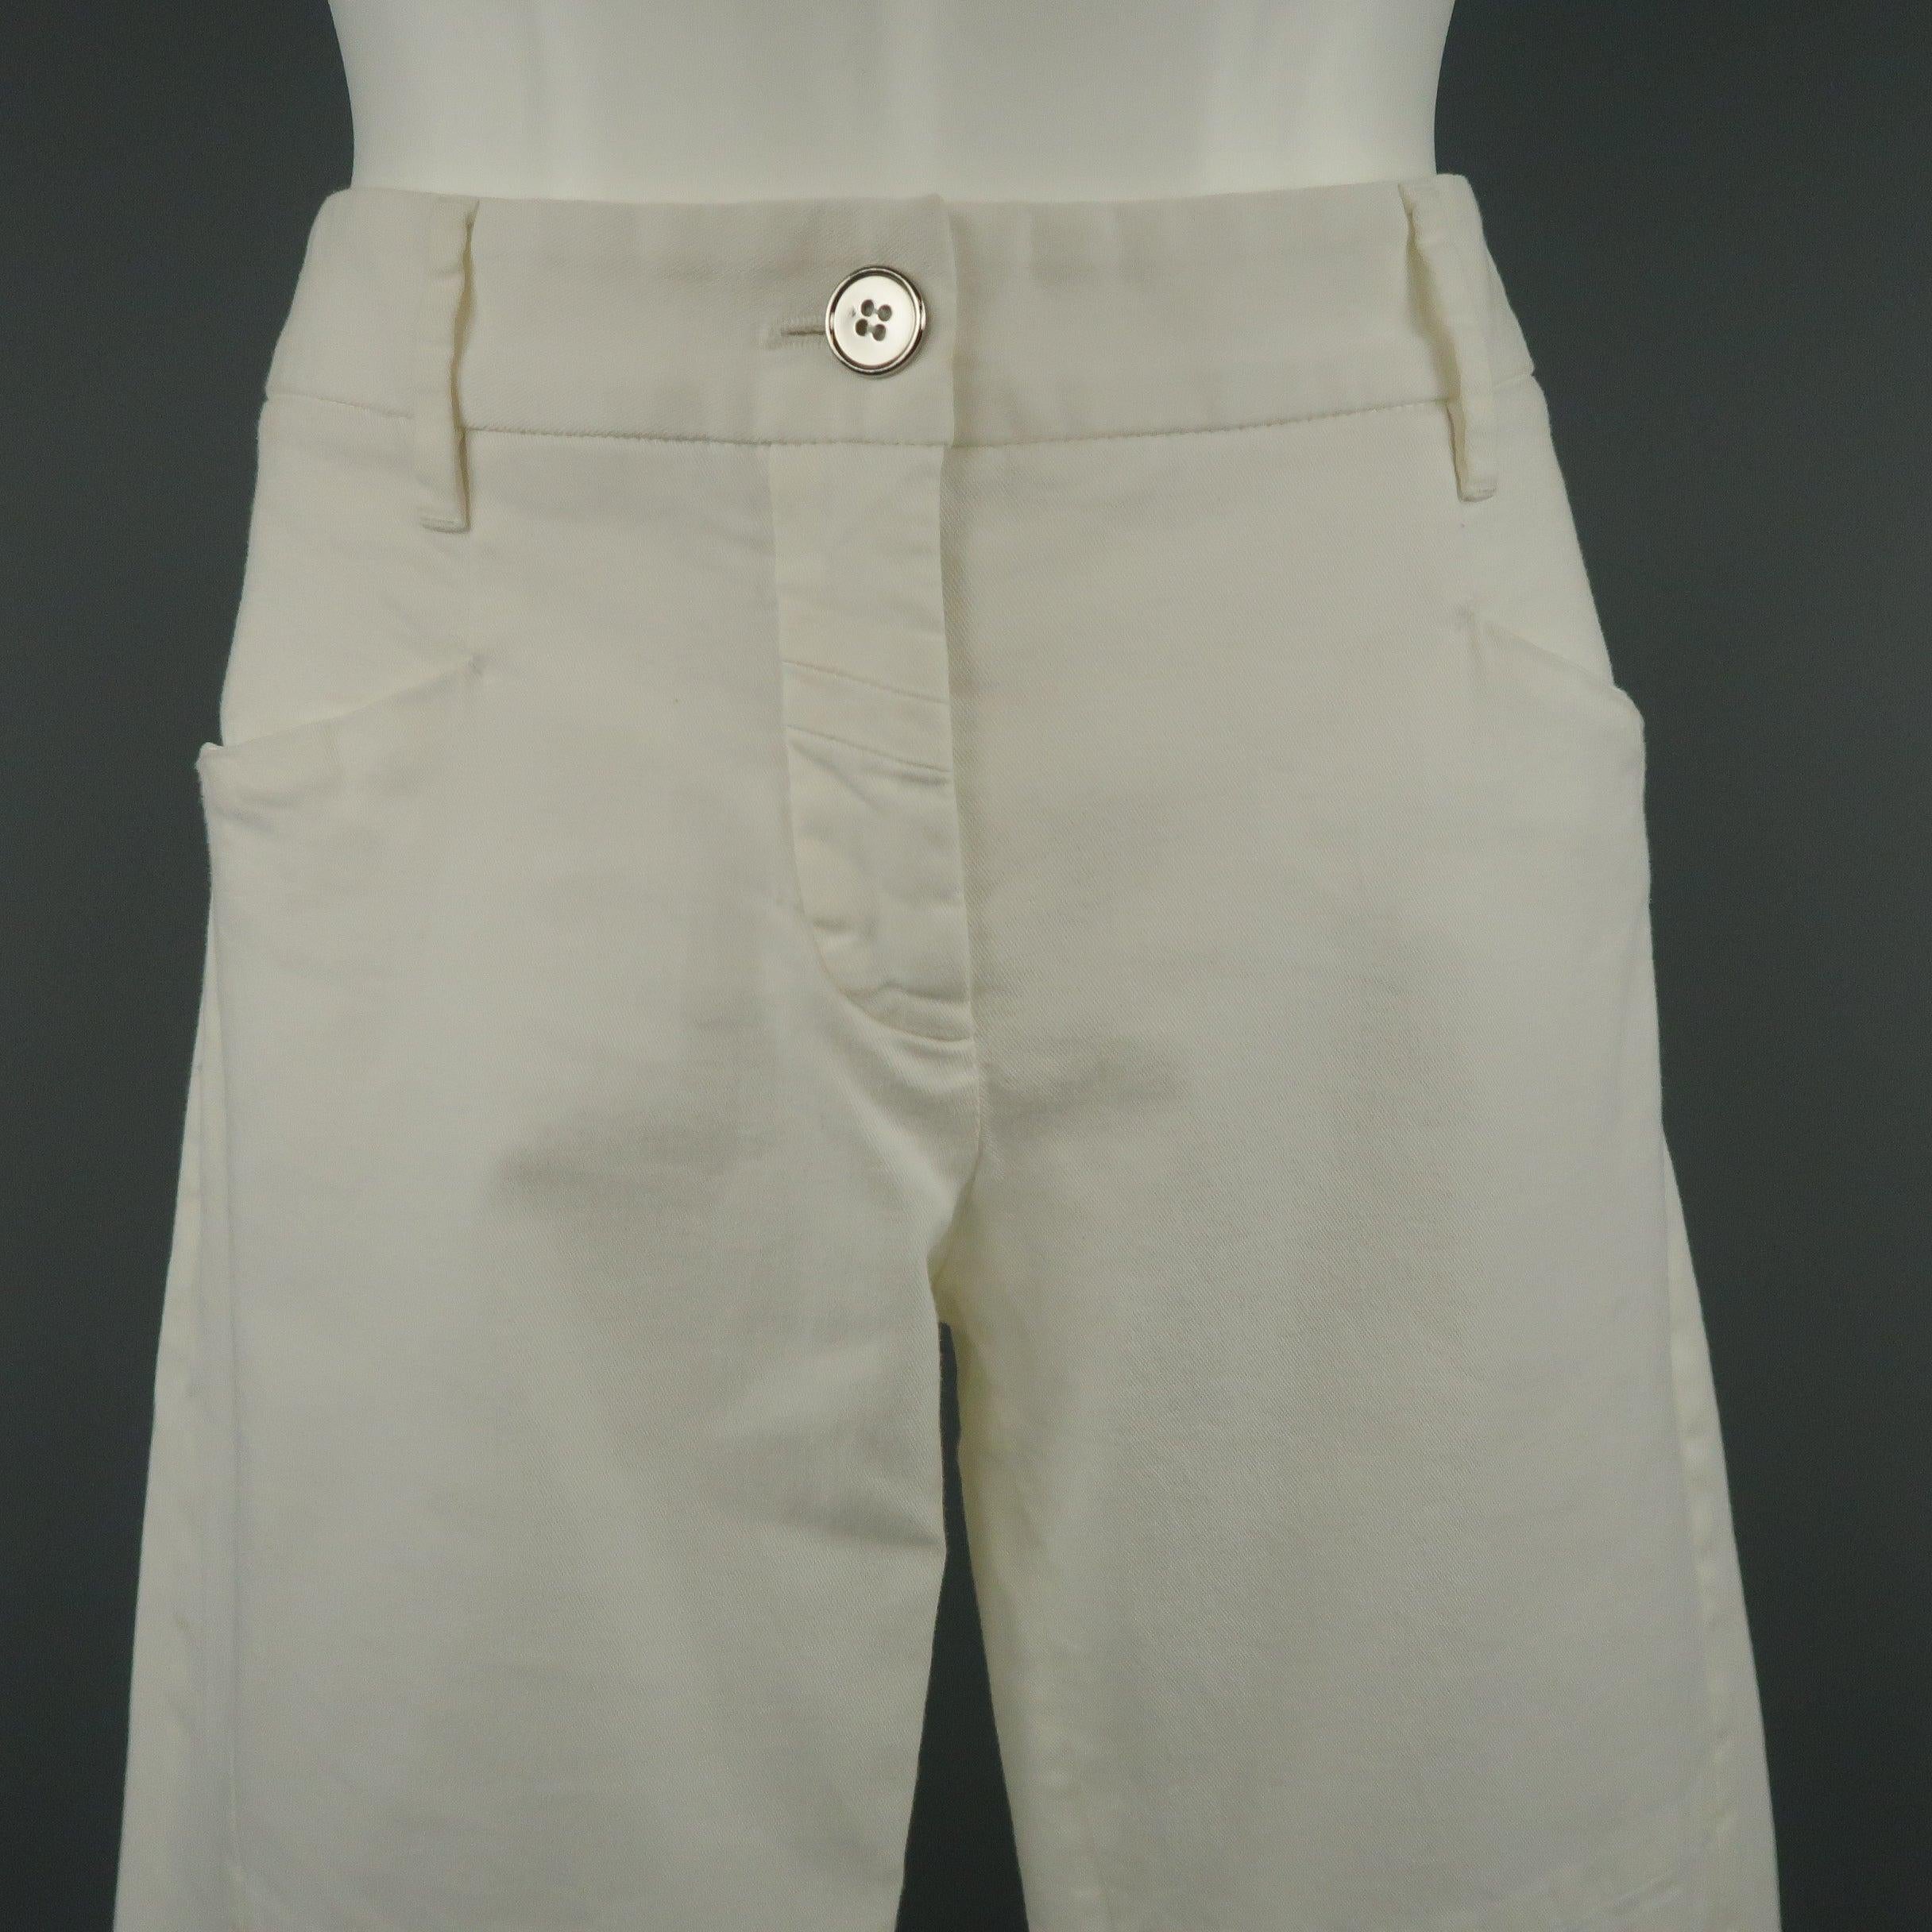 DOLCE & GABBANA skinny pants come in white stretch cotton twill with a metallic silver tone button and biker pant details. Minor wear. Made in Italy.Very Good Pre-Owned Condition. 

Marked:   IT 42 

Measurements: 
  Waist: 32 inches Rise: 8 inches